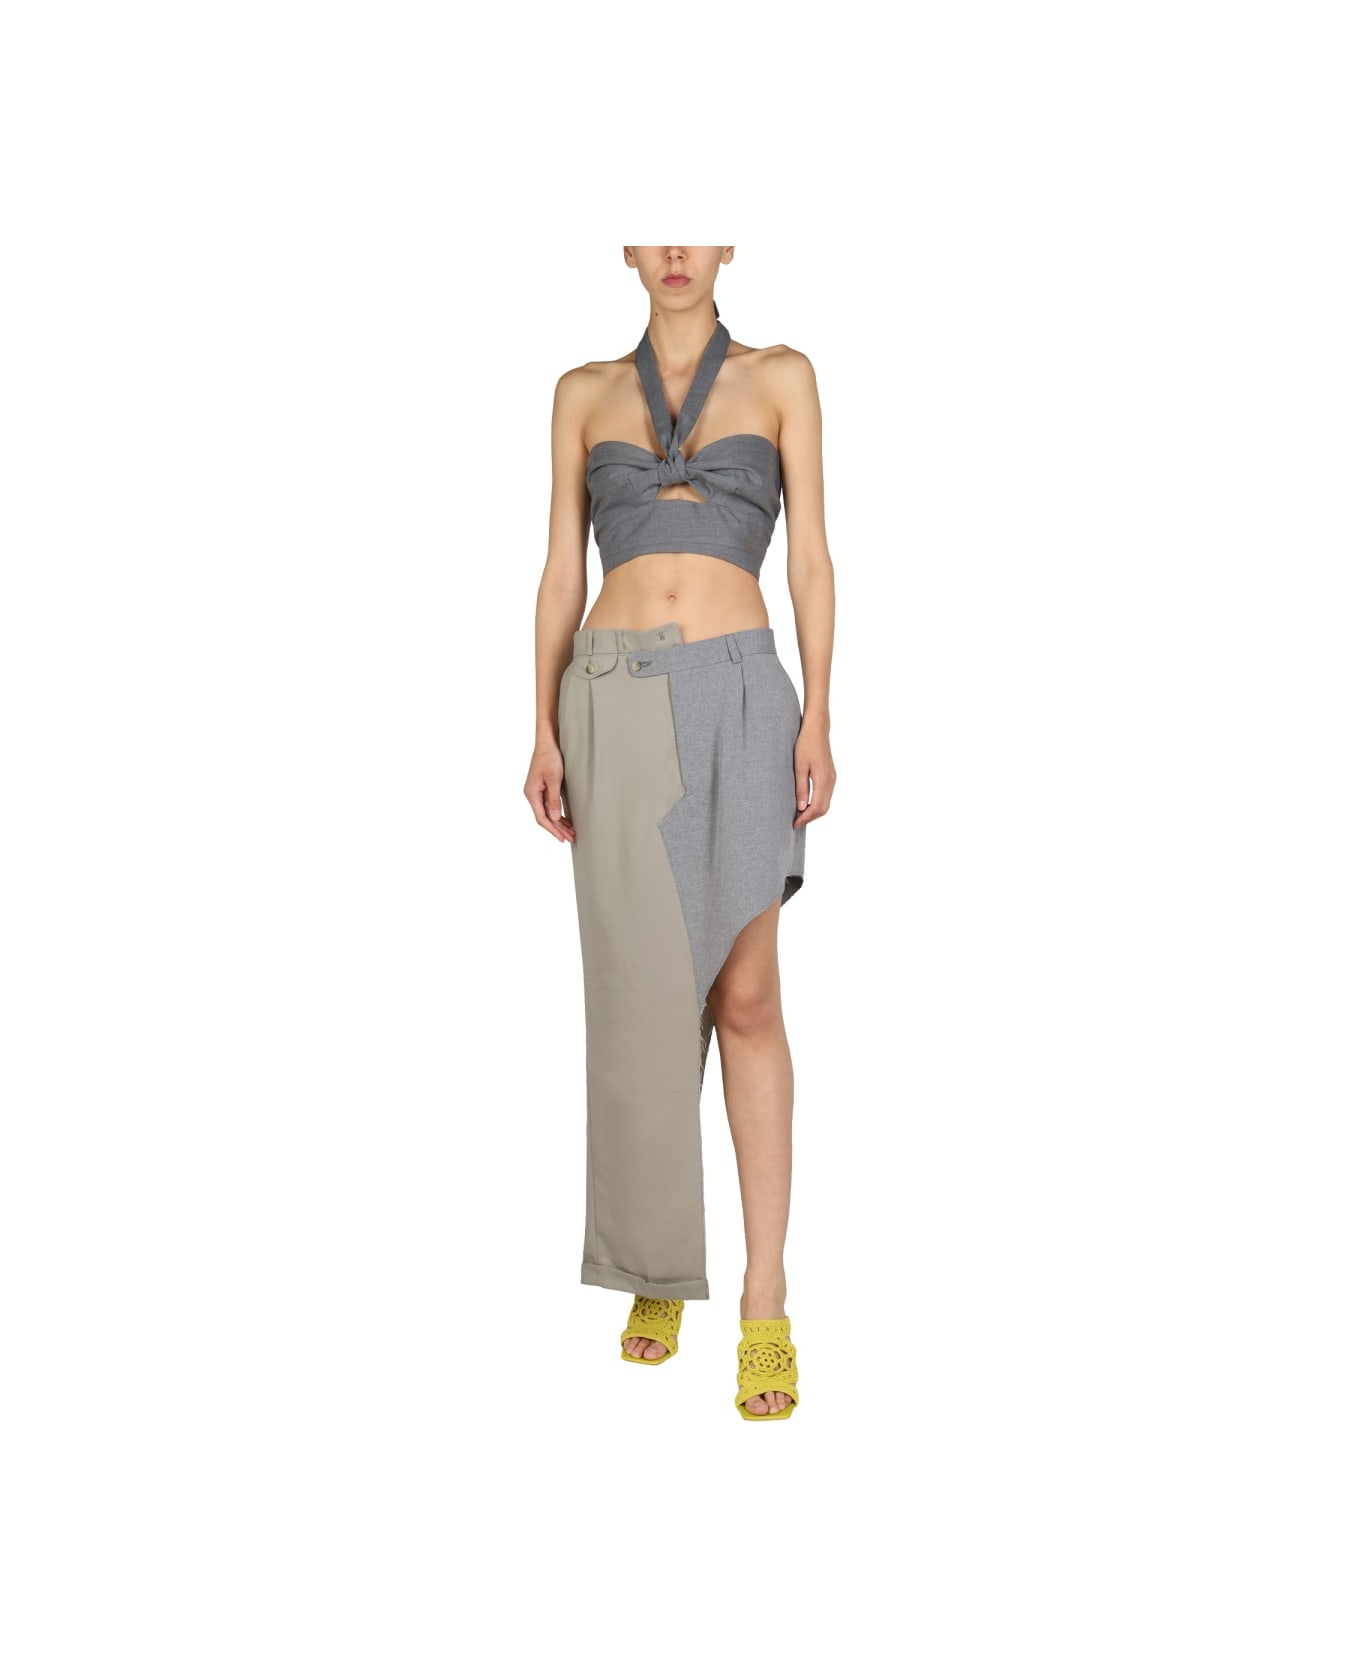 1/OFF Top With Crossed Straps - GREY